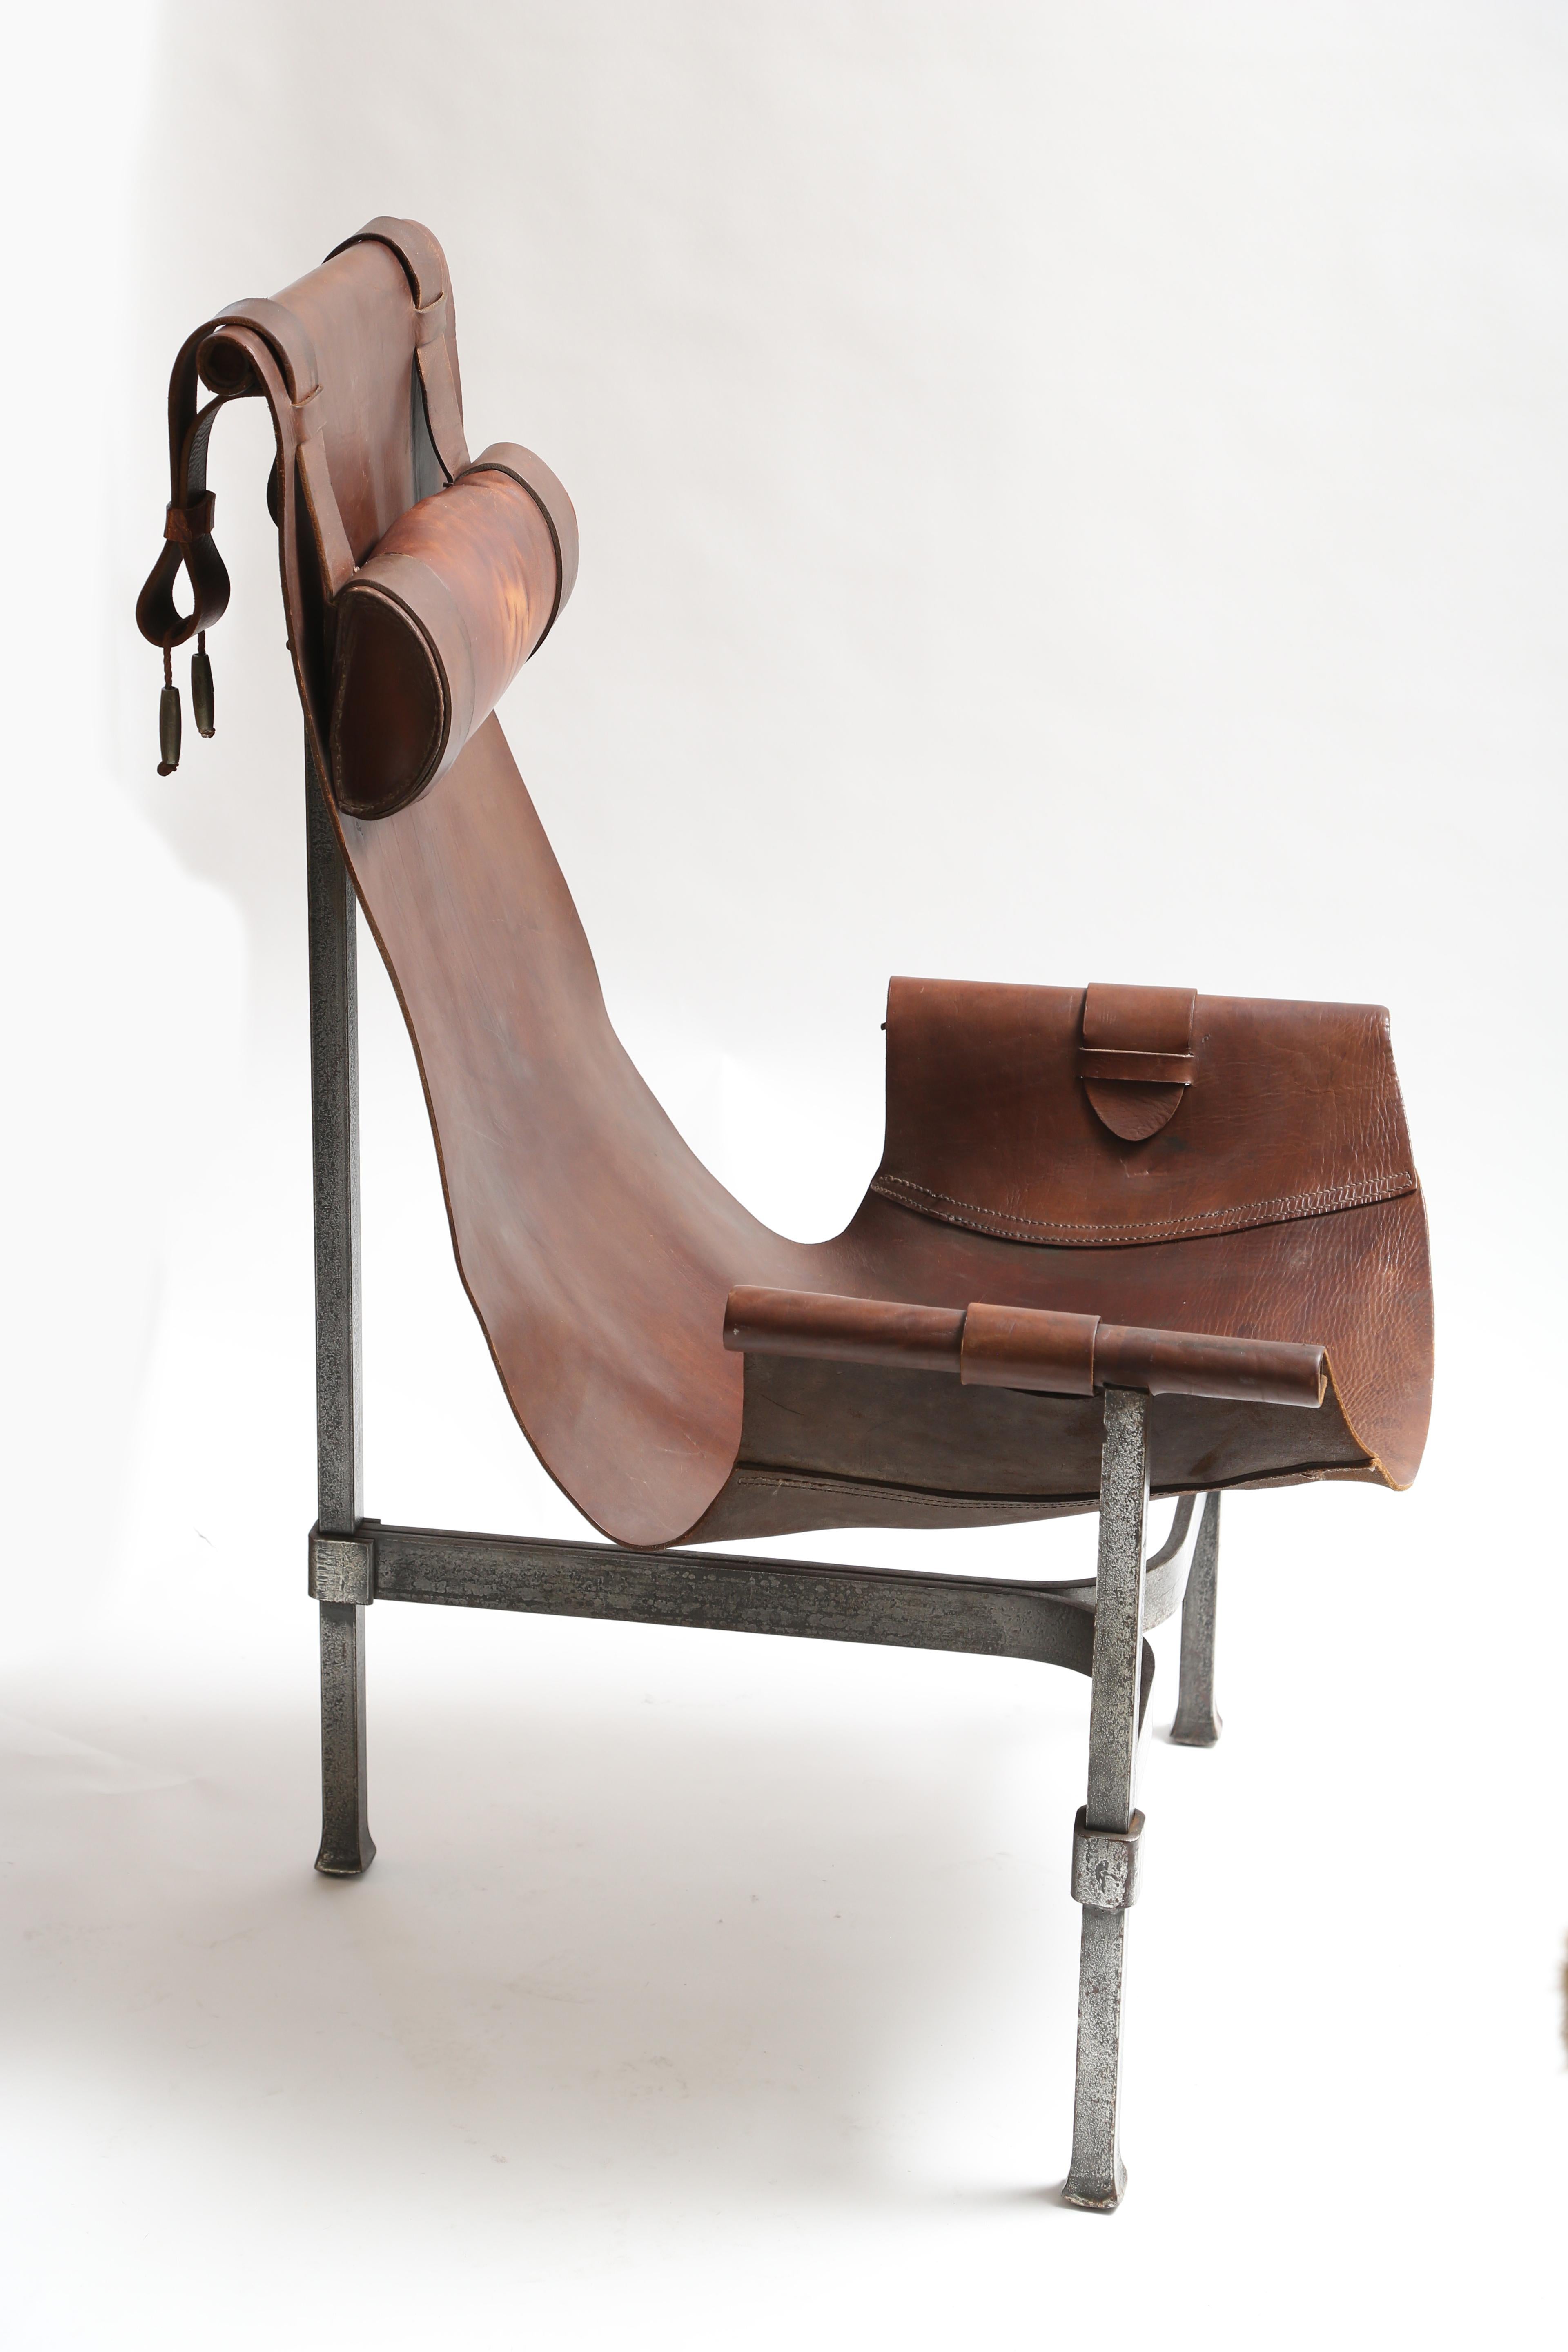 American Tall Leather and Iron T-Chair